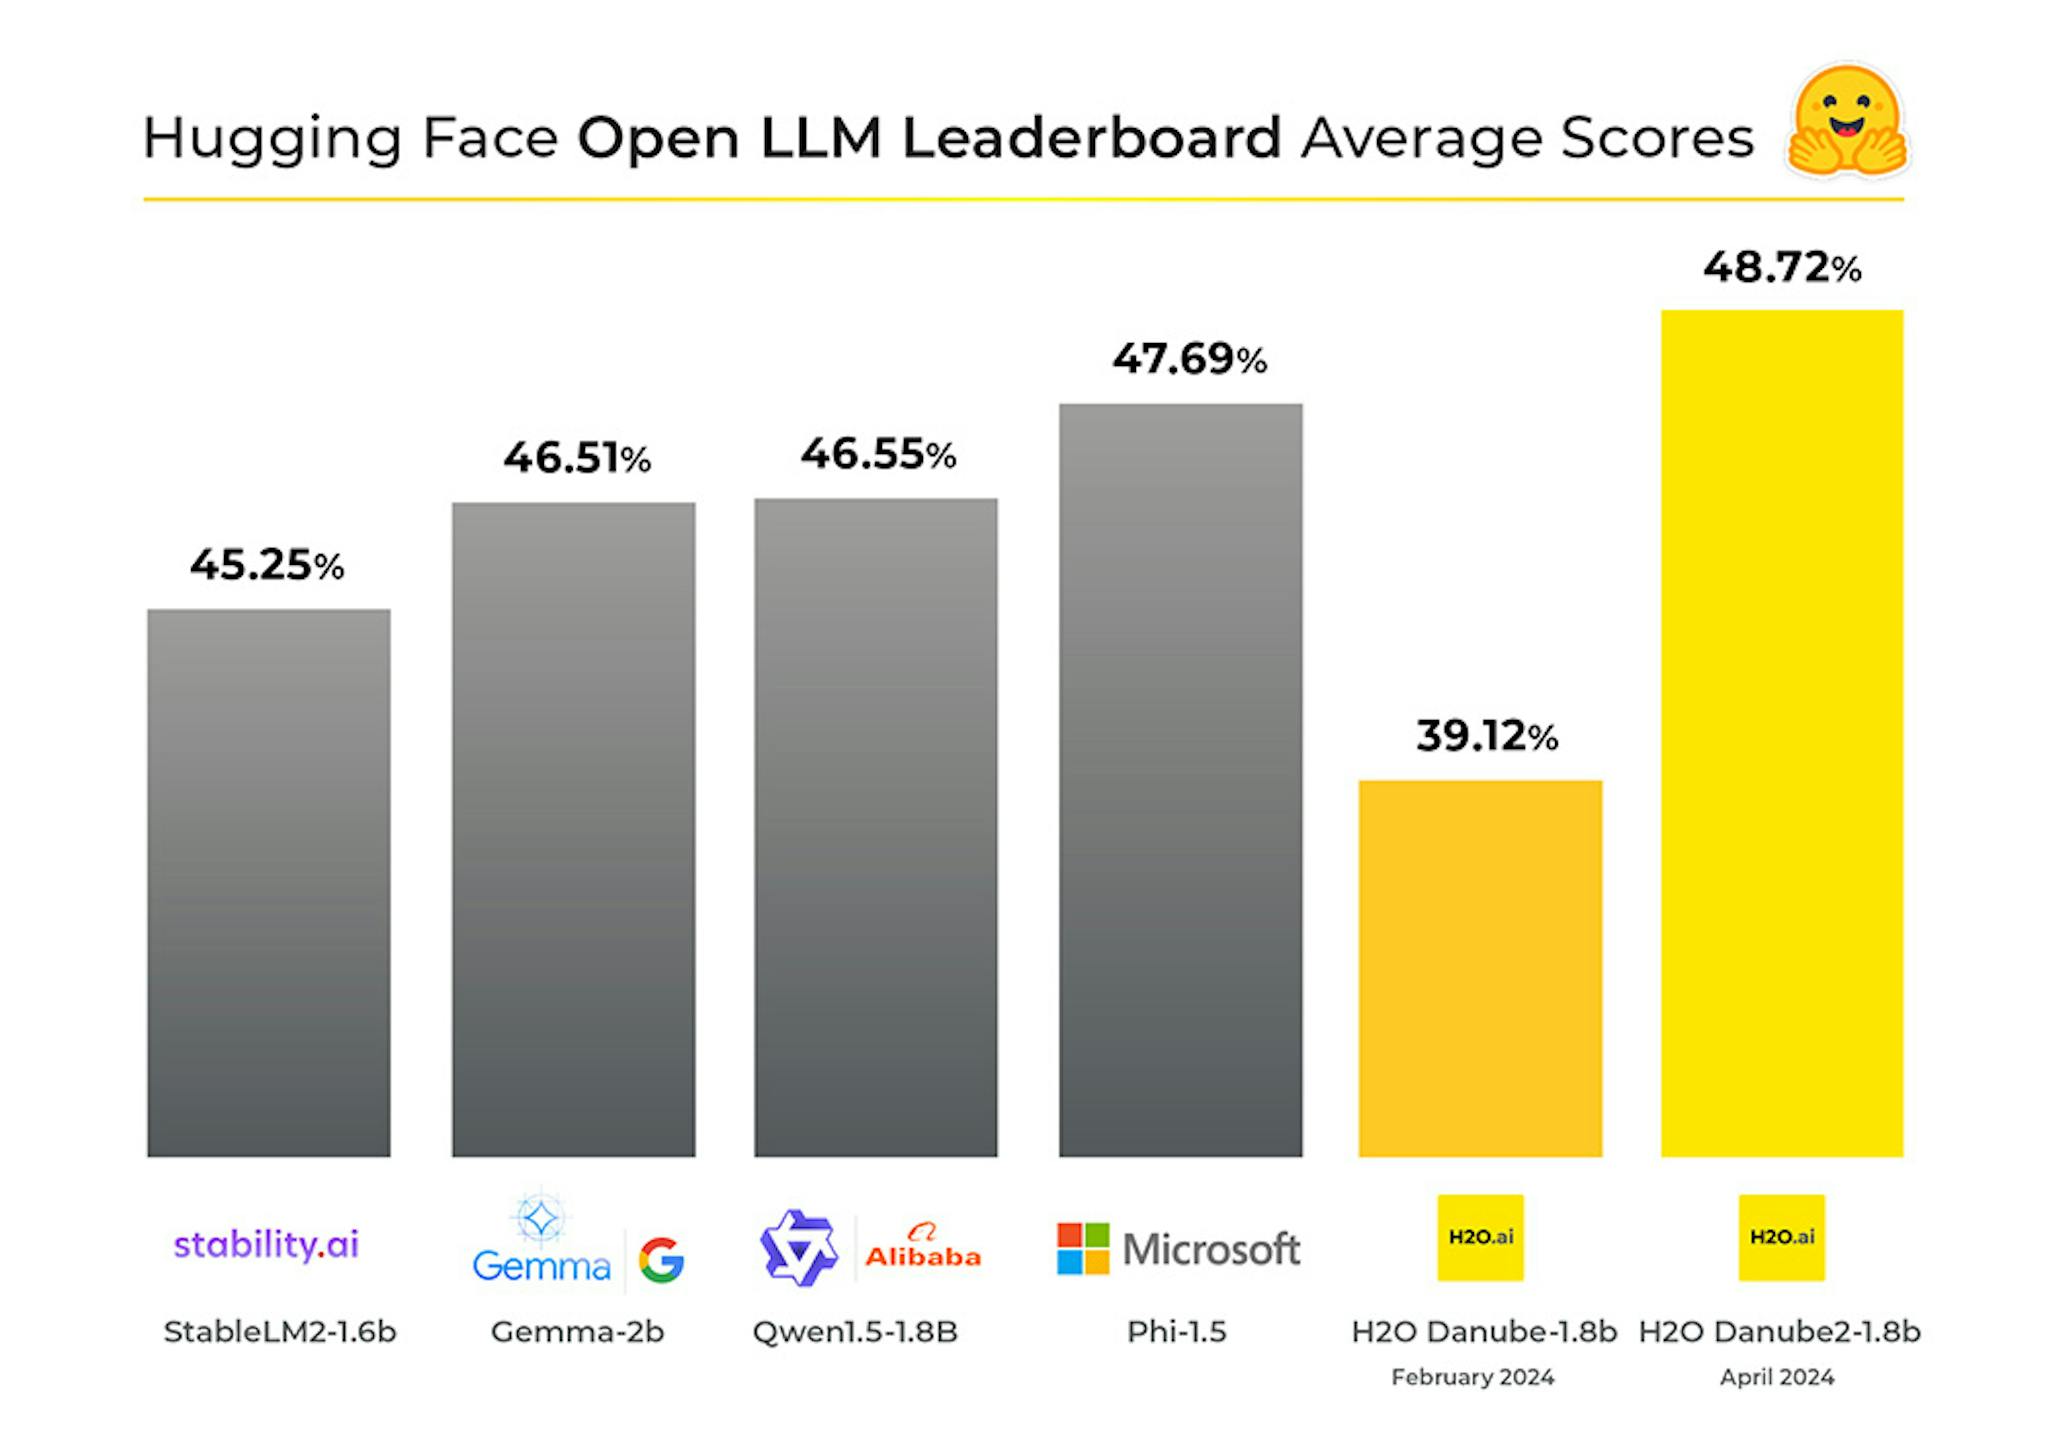 featured image - Danube-2: The Tiny AI Model Leading the Open LLM Leaderboard